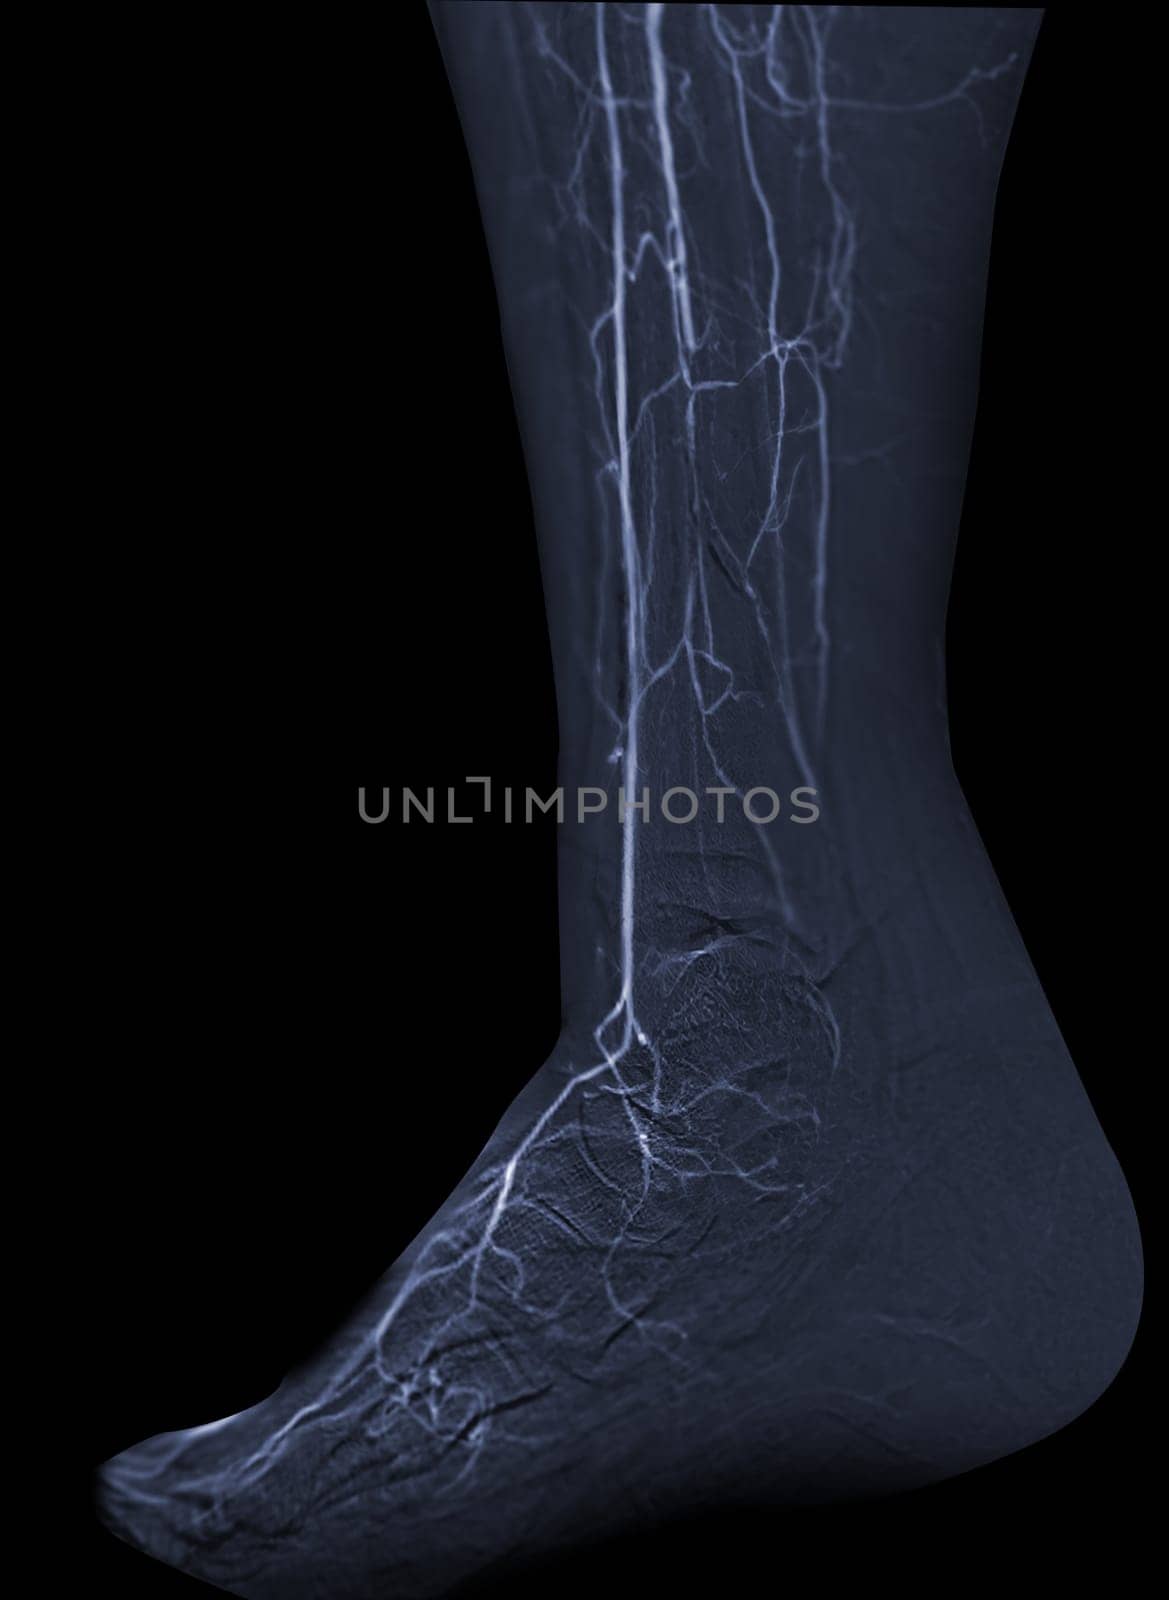 Femoral artery angiogram or angiography  at lower extremity area. by samunella